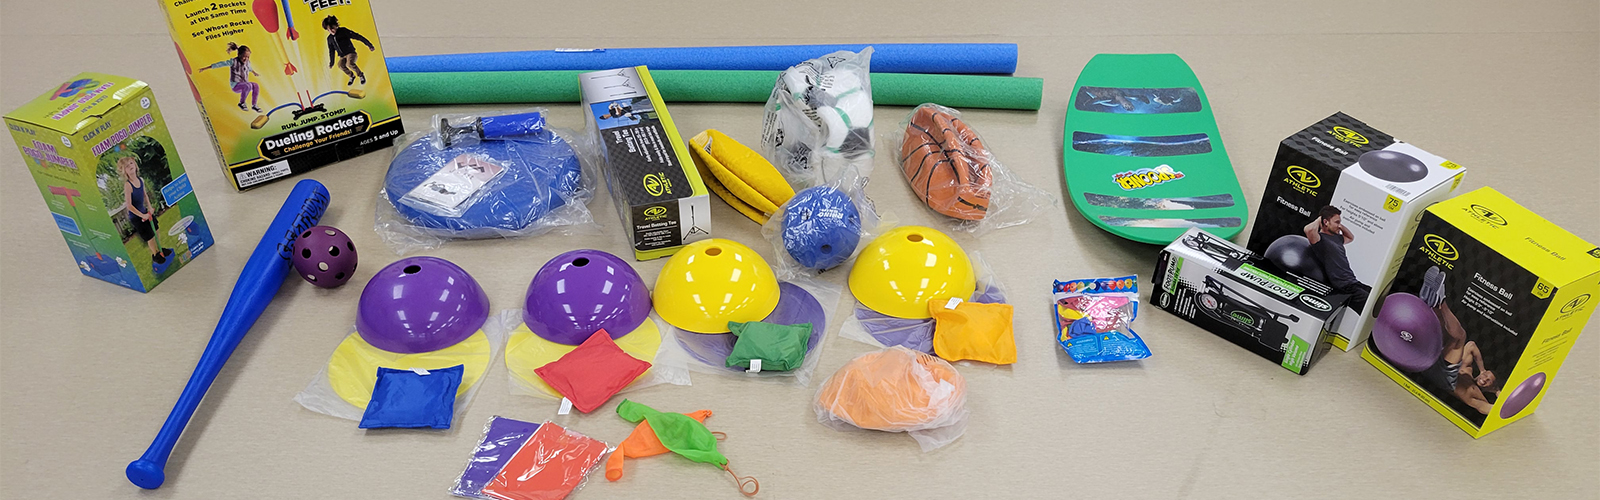 Examples of equipment provided by the Fit Families Programs for kids to play at home with their parents.